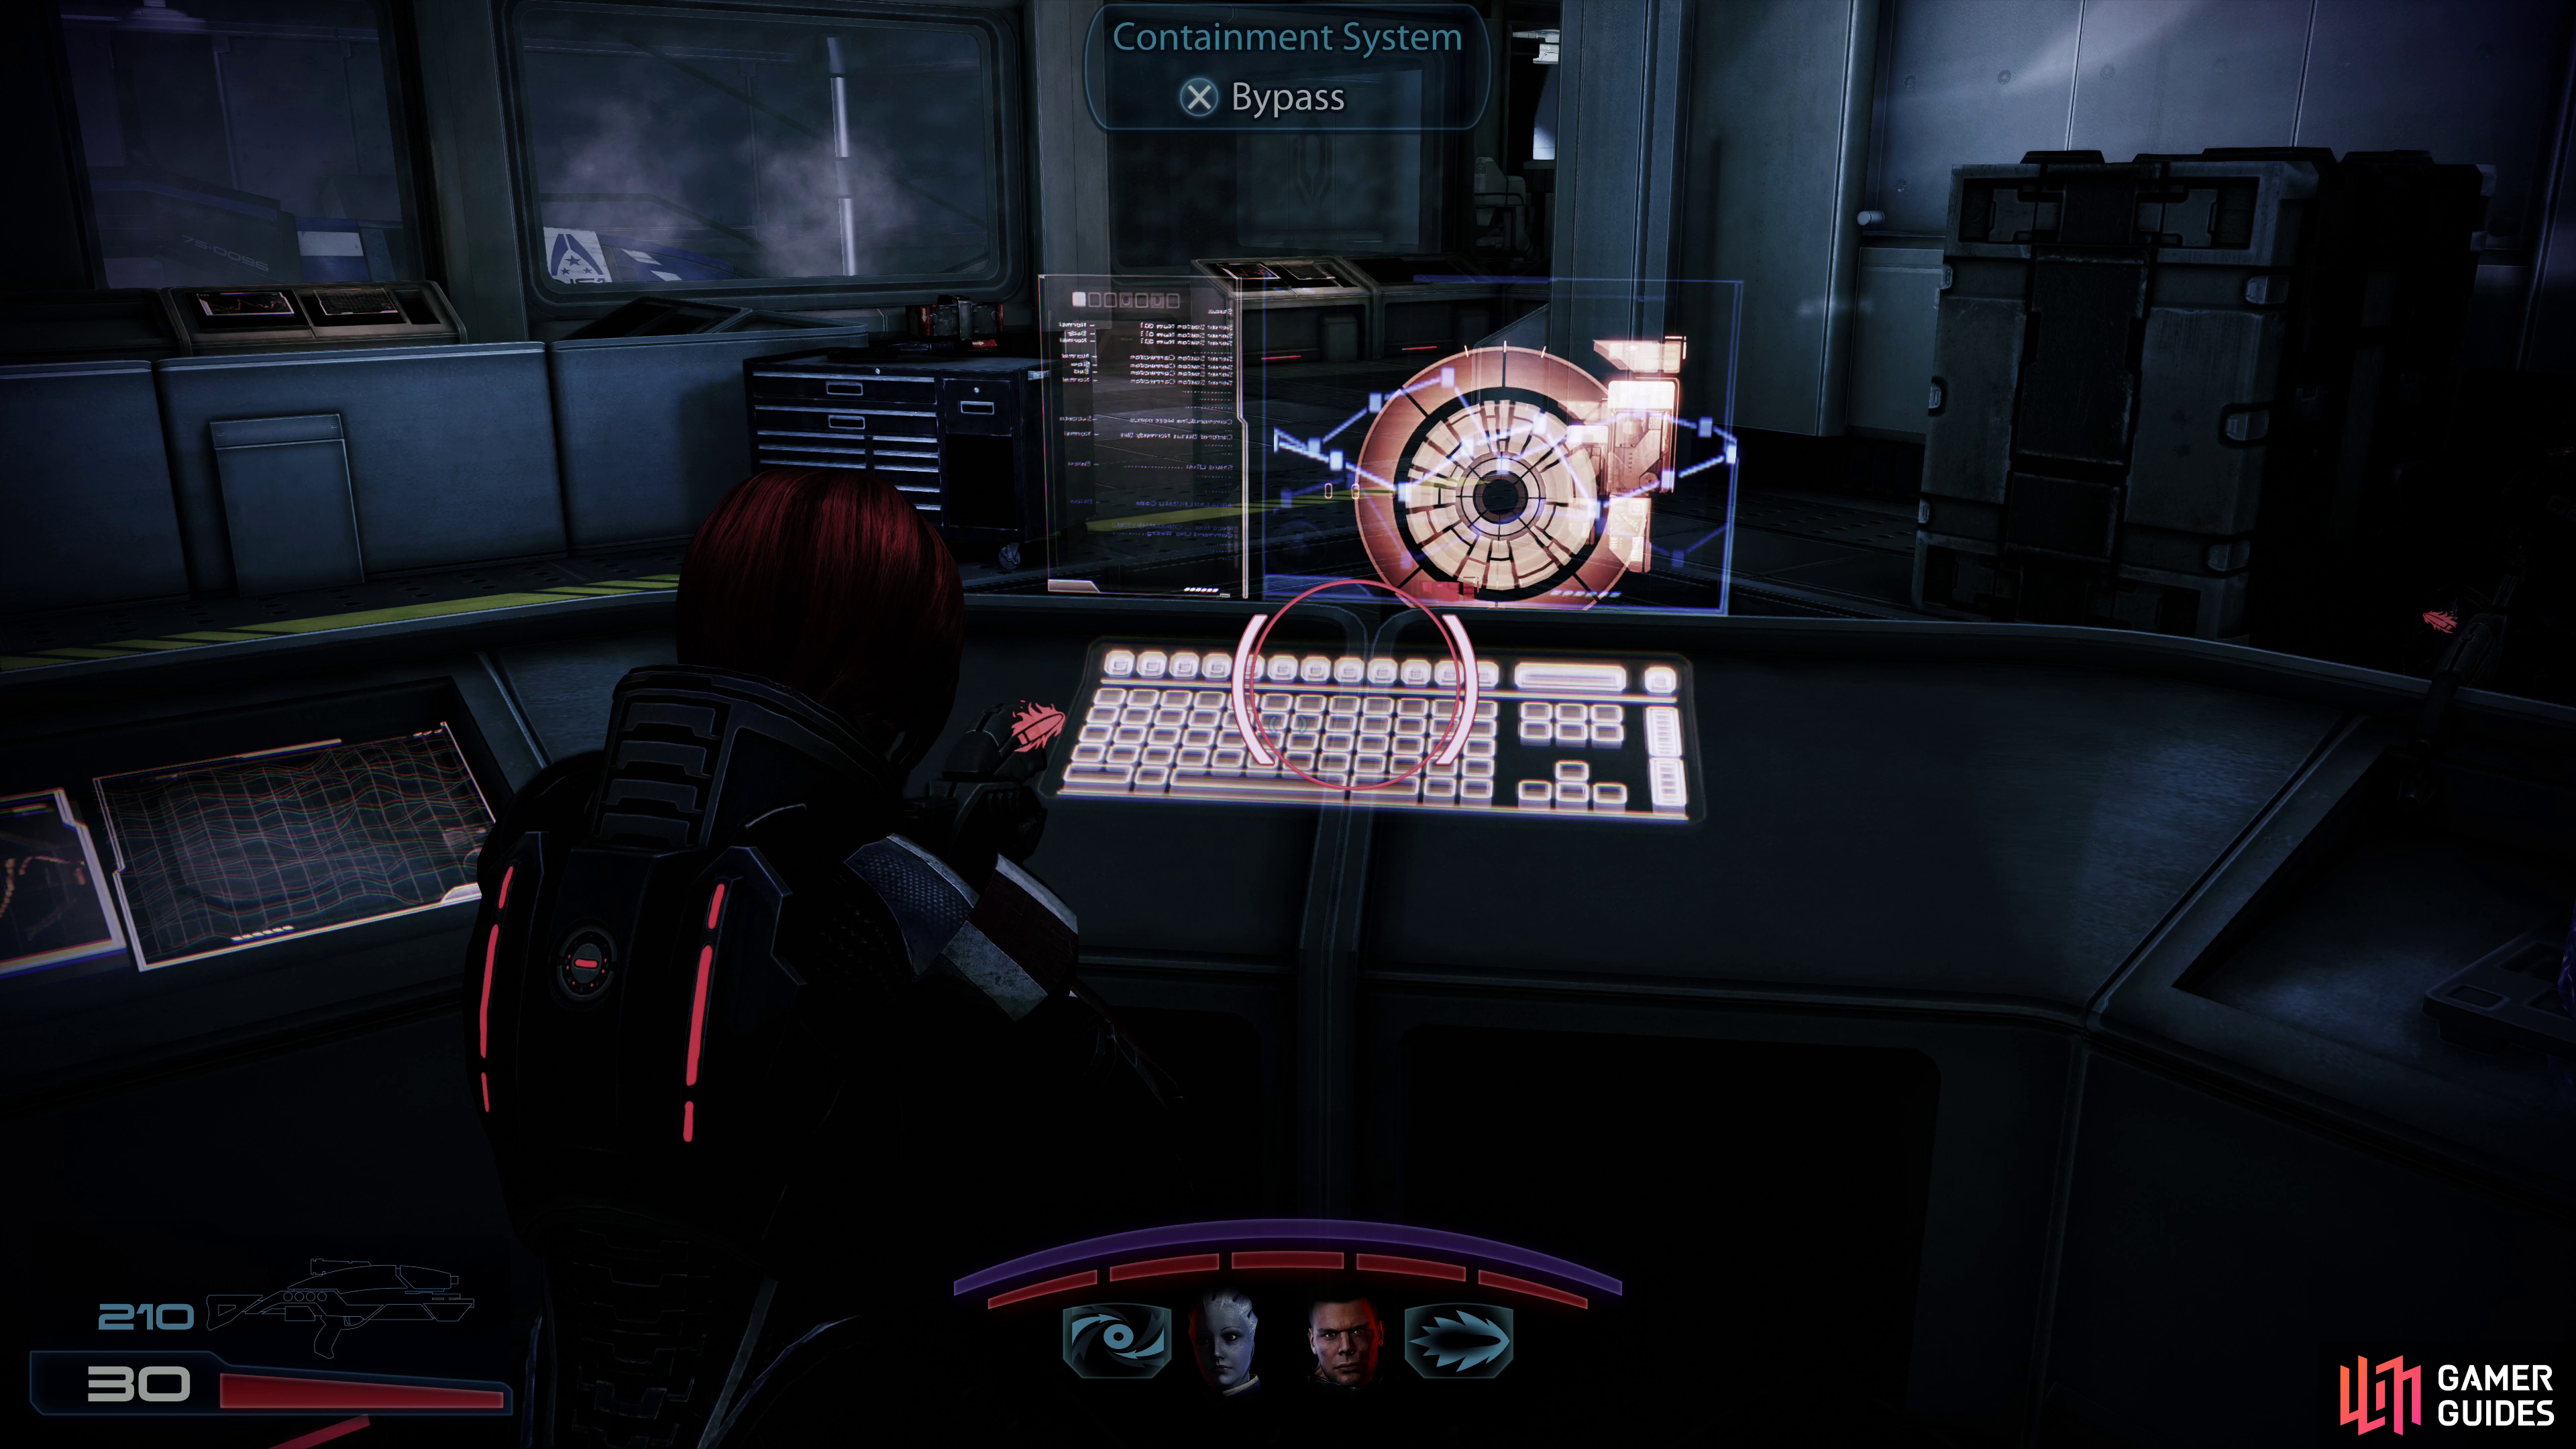 The substance of this mission involved bypassing the security on various Reaper Artifacts,